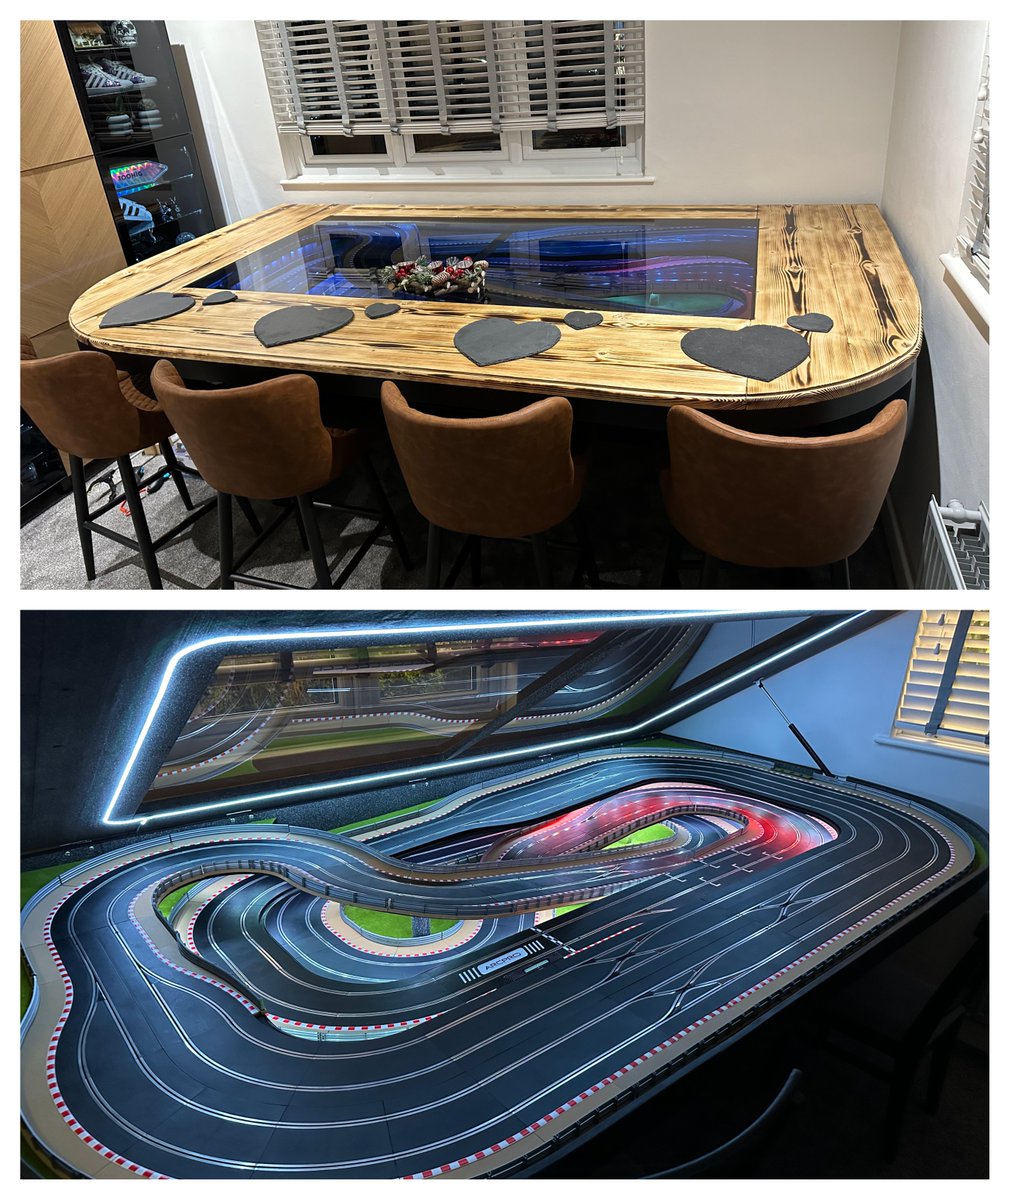 We’ve got a cracker for you in this week’s #FeatureFriday post… check out this track hidden within a dining tablet, complete with lighting 😍 Thank you to James for sharing with us 🙌